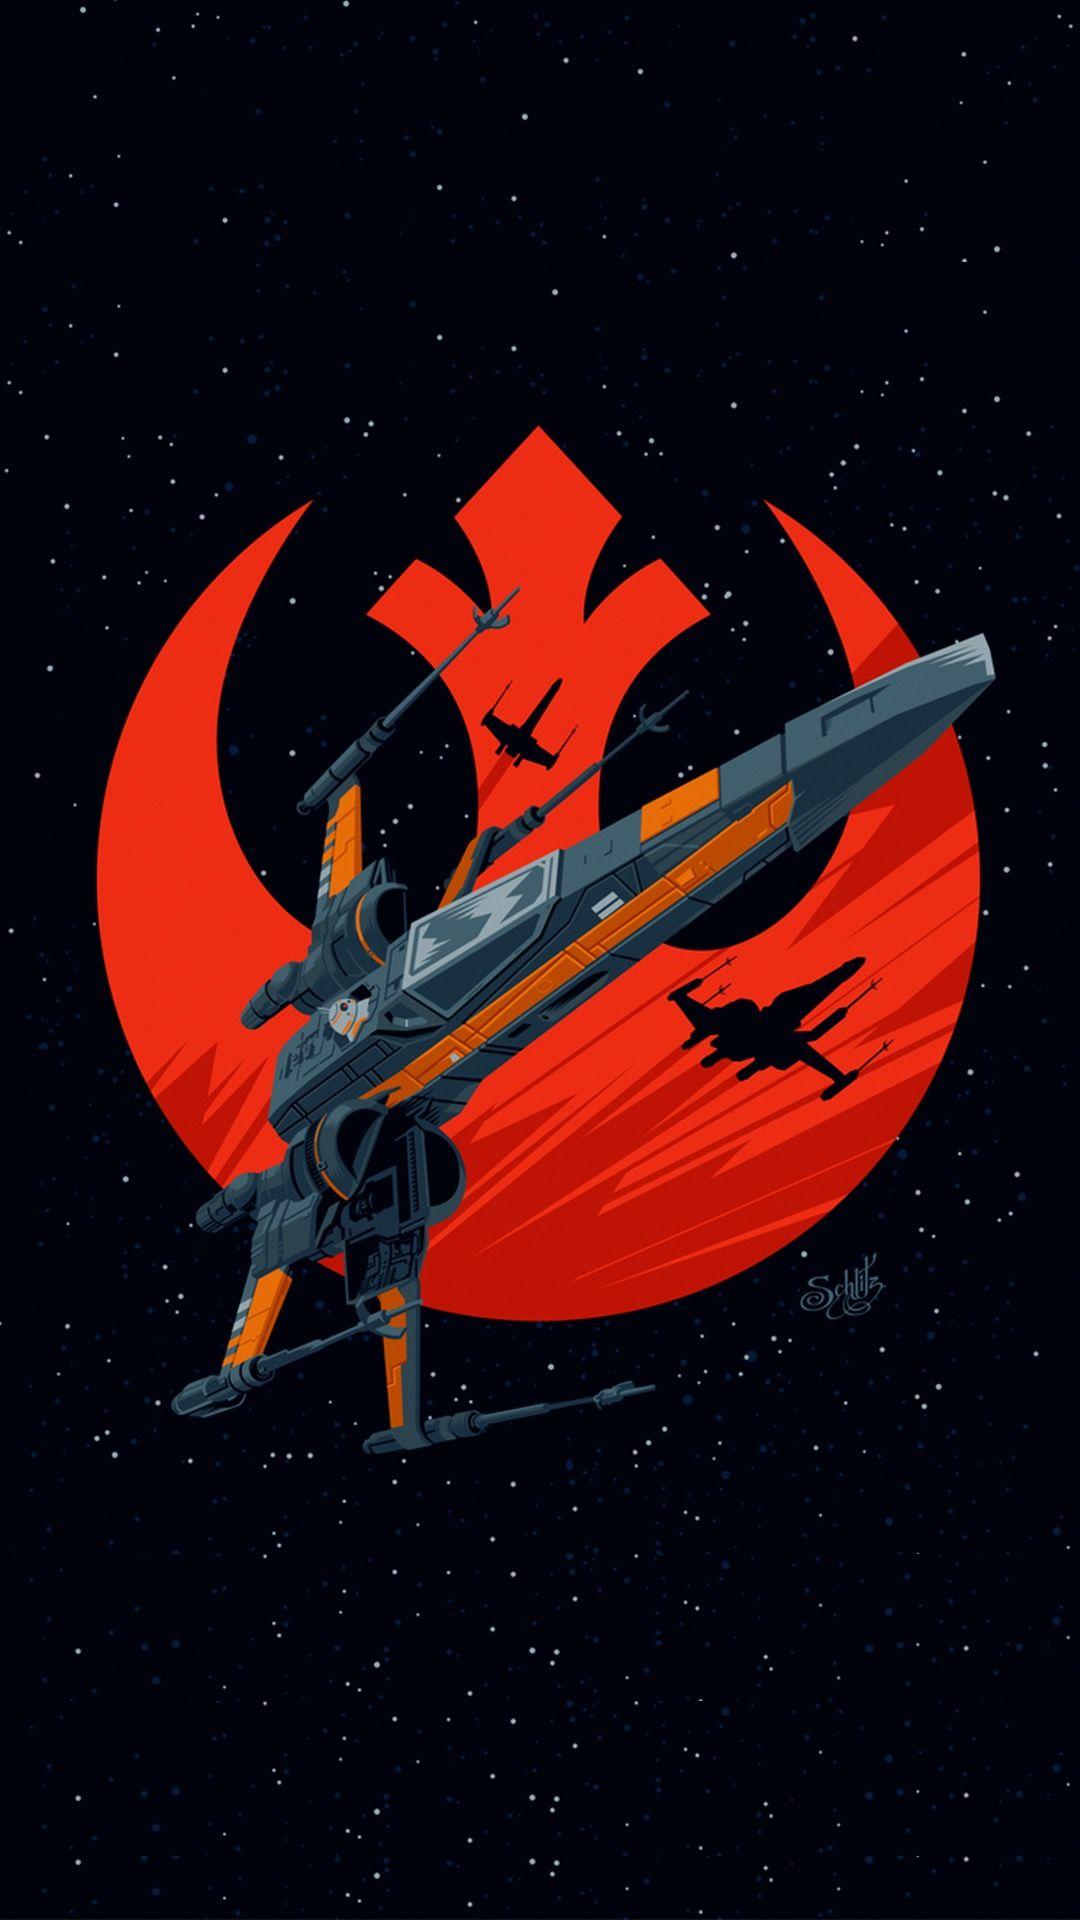 star wars phone wallpapers  Google Search  Star wars art Star wars  wallpaper Star wars fan art